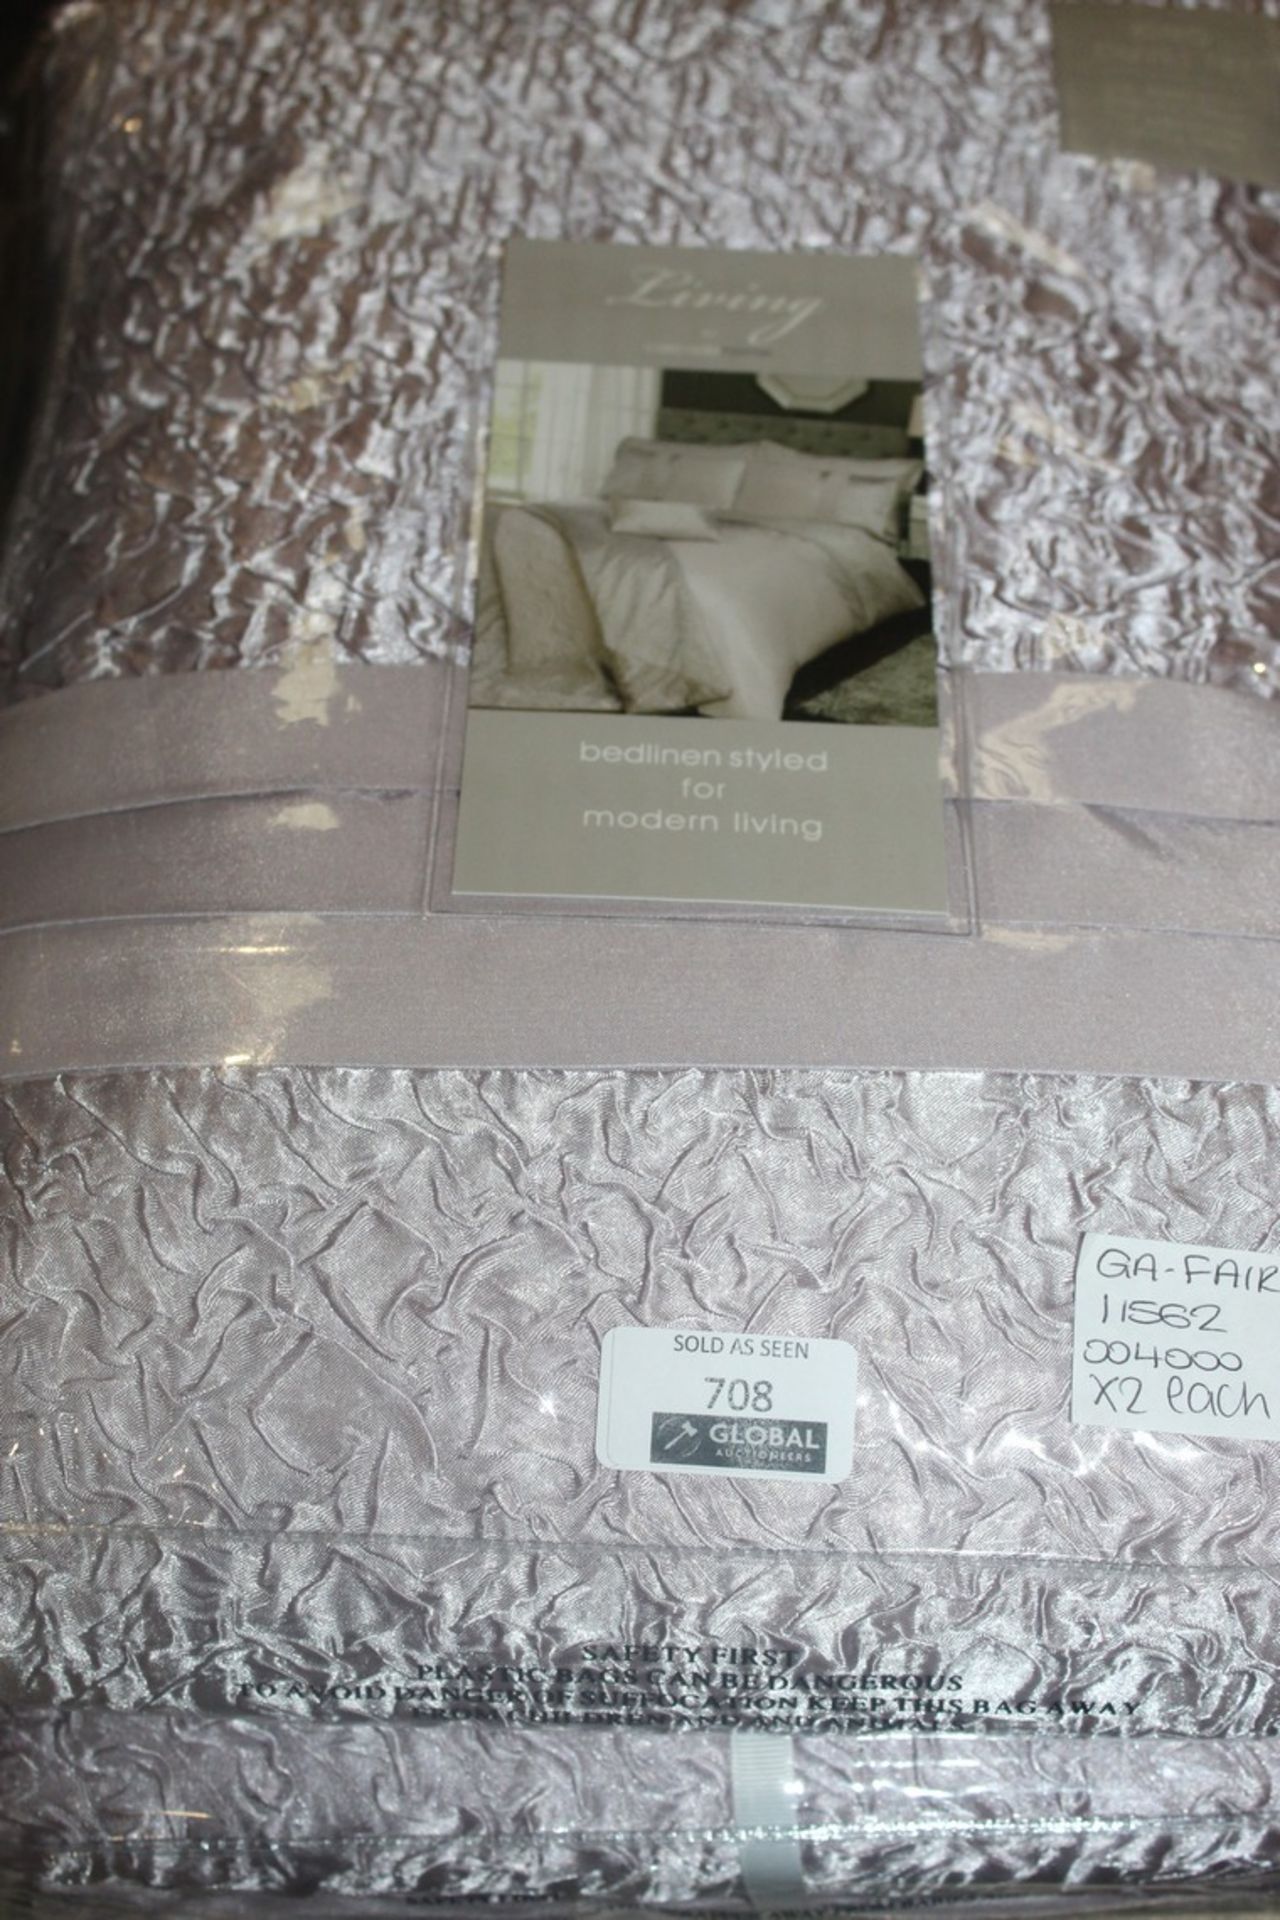 Living By Cascade Home Ruffle Charlotte King Size Duvet Cover Sets RRP £40 Each (11562) (Pictures